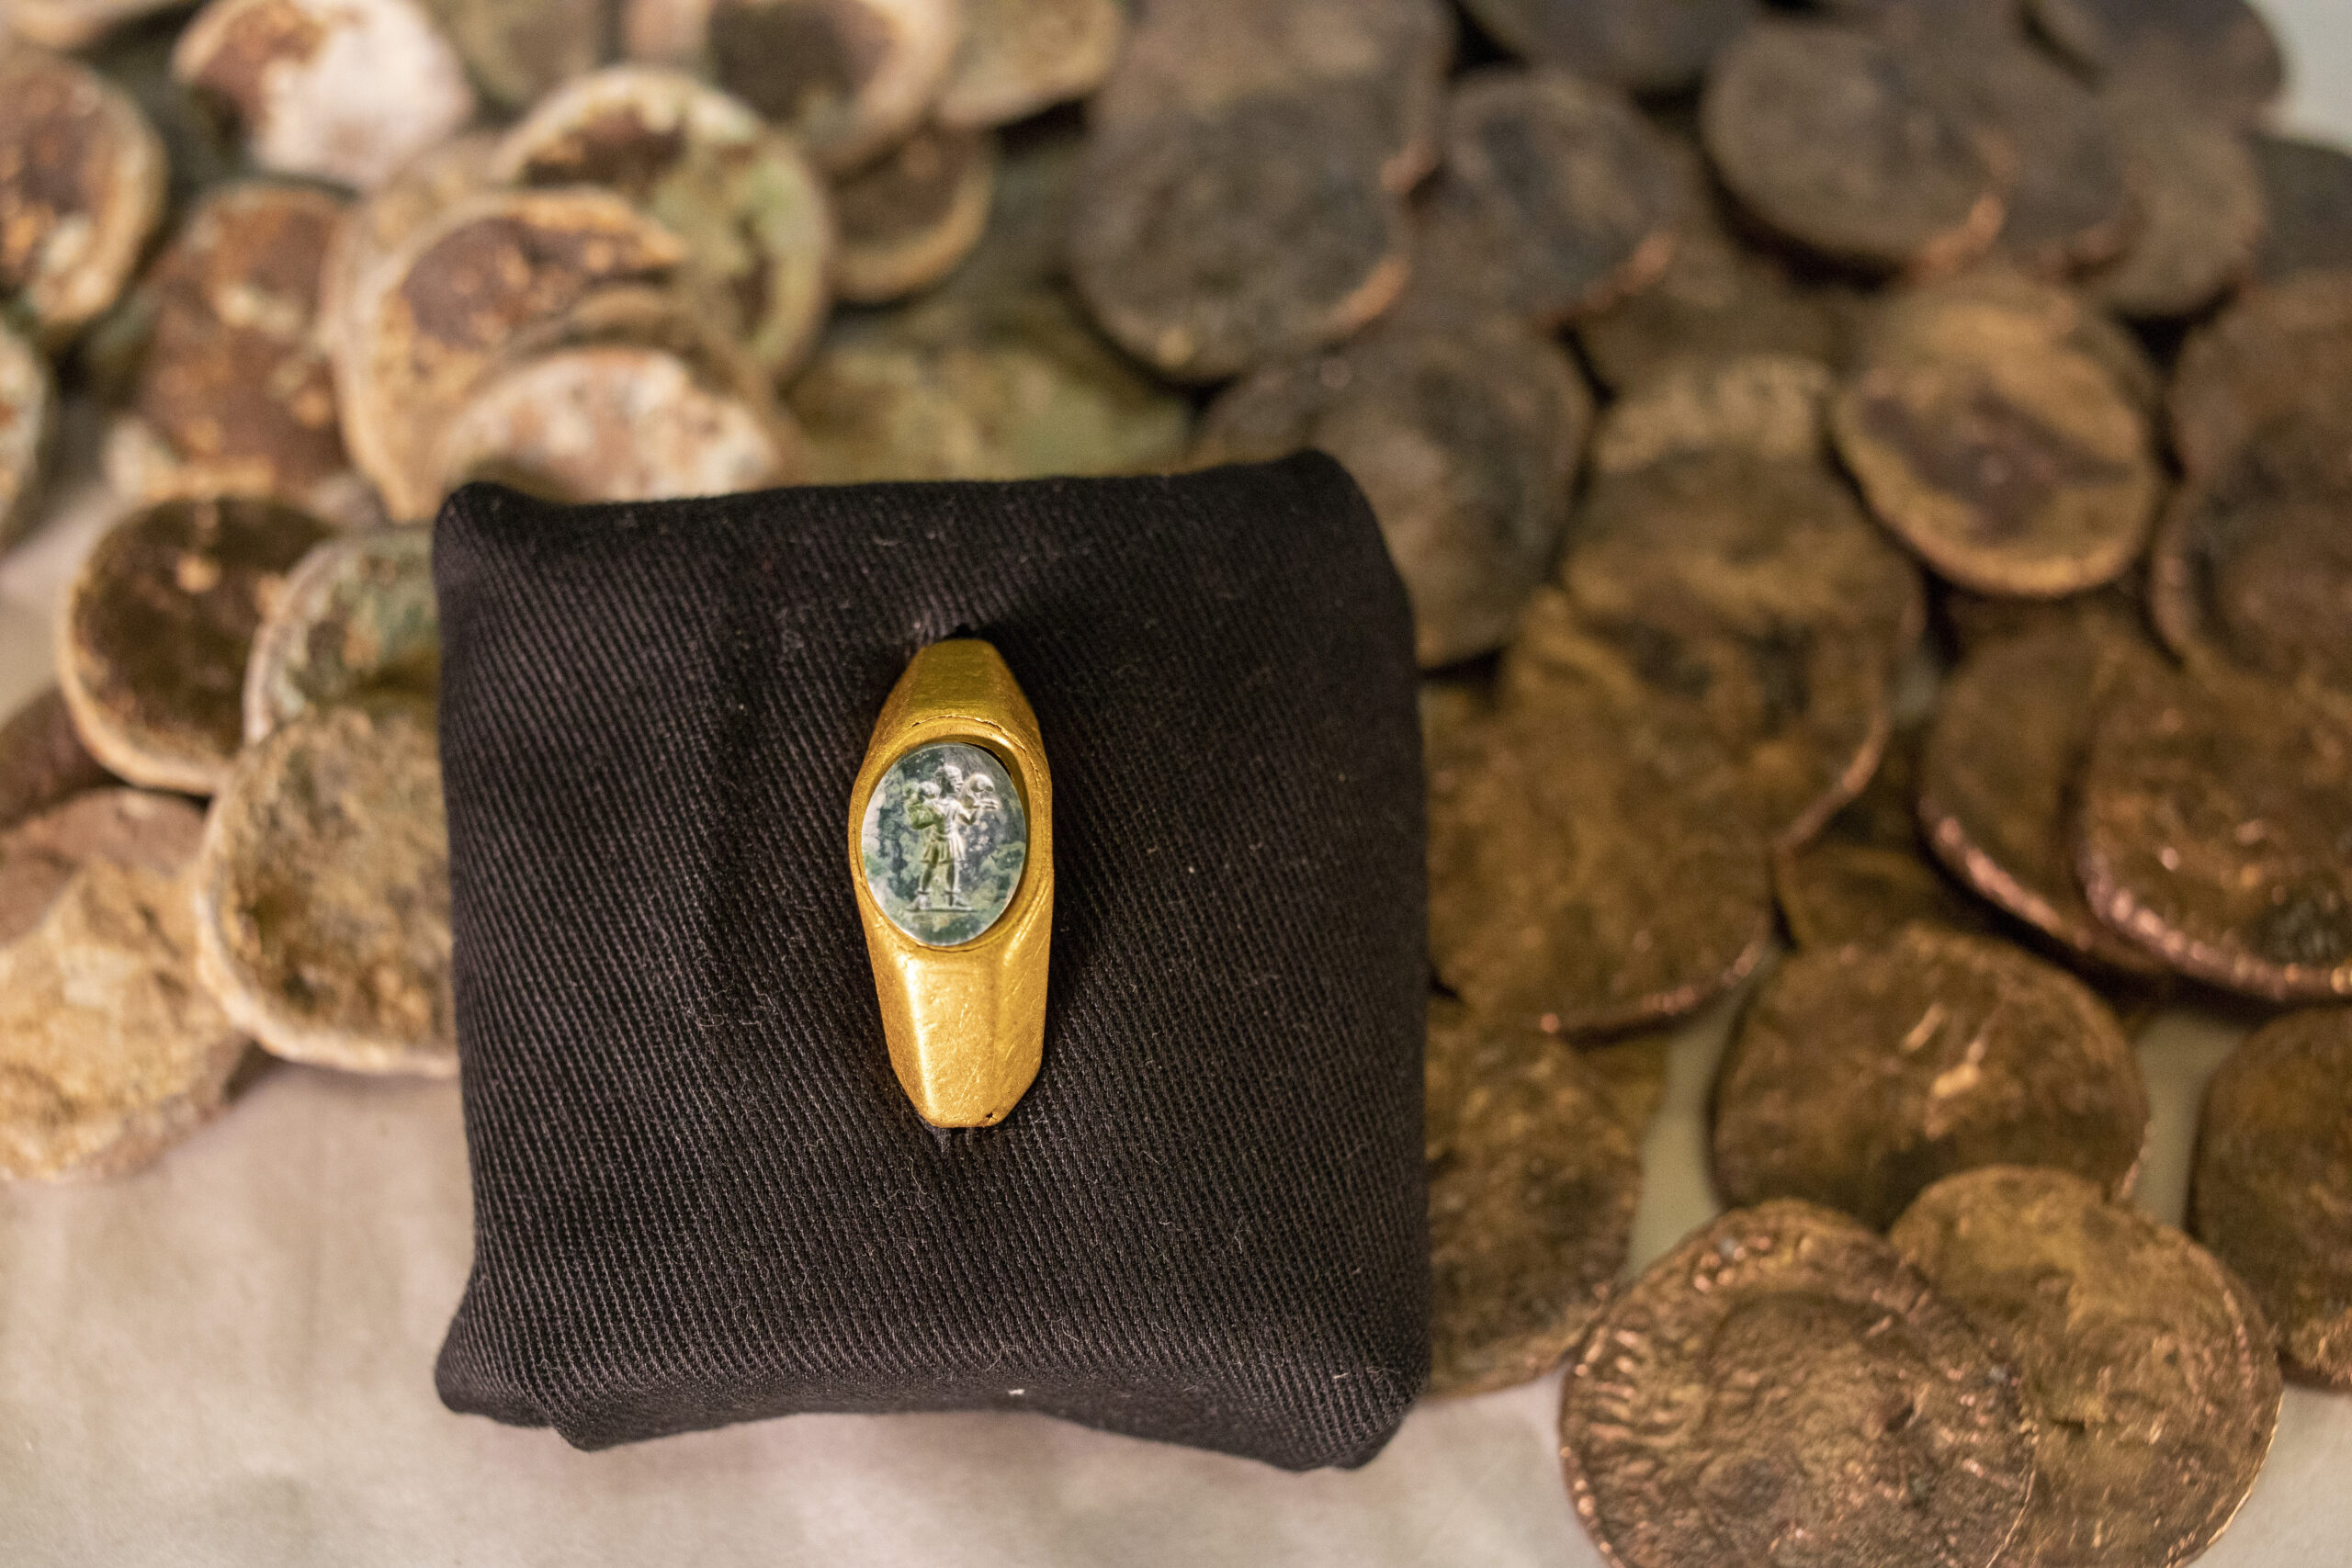 Roman gold ring, its green gemstone carved with the figure of a shepherd carrying a sheep on his shoulders is on display with coins that where found near the ancient city of Caesarea, dated to the Roman and Mamluk periods, around 1,700 and 600 years ago, in Jerusalem, Wednesday, Dec. 22, 2021. The Israel Antiquities Authority says it discovered the remnants of two shipwrecks off the Mediterranean coast replete with a sunken trove of hundreds of silver and bronze coins and Roman and medieval artifacts. "The image, of the 'Good Shepherd', is one of the earliest and oldest images used in Christianity for symbolizing Jesus," the IAA said in its announcement, speculating that the owner may have been an early Christian. (AP Photo/Ariel Schalit)